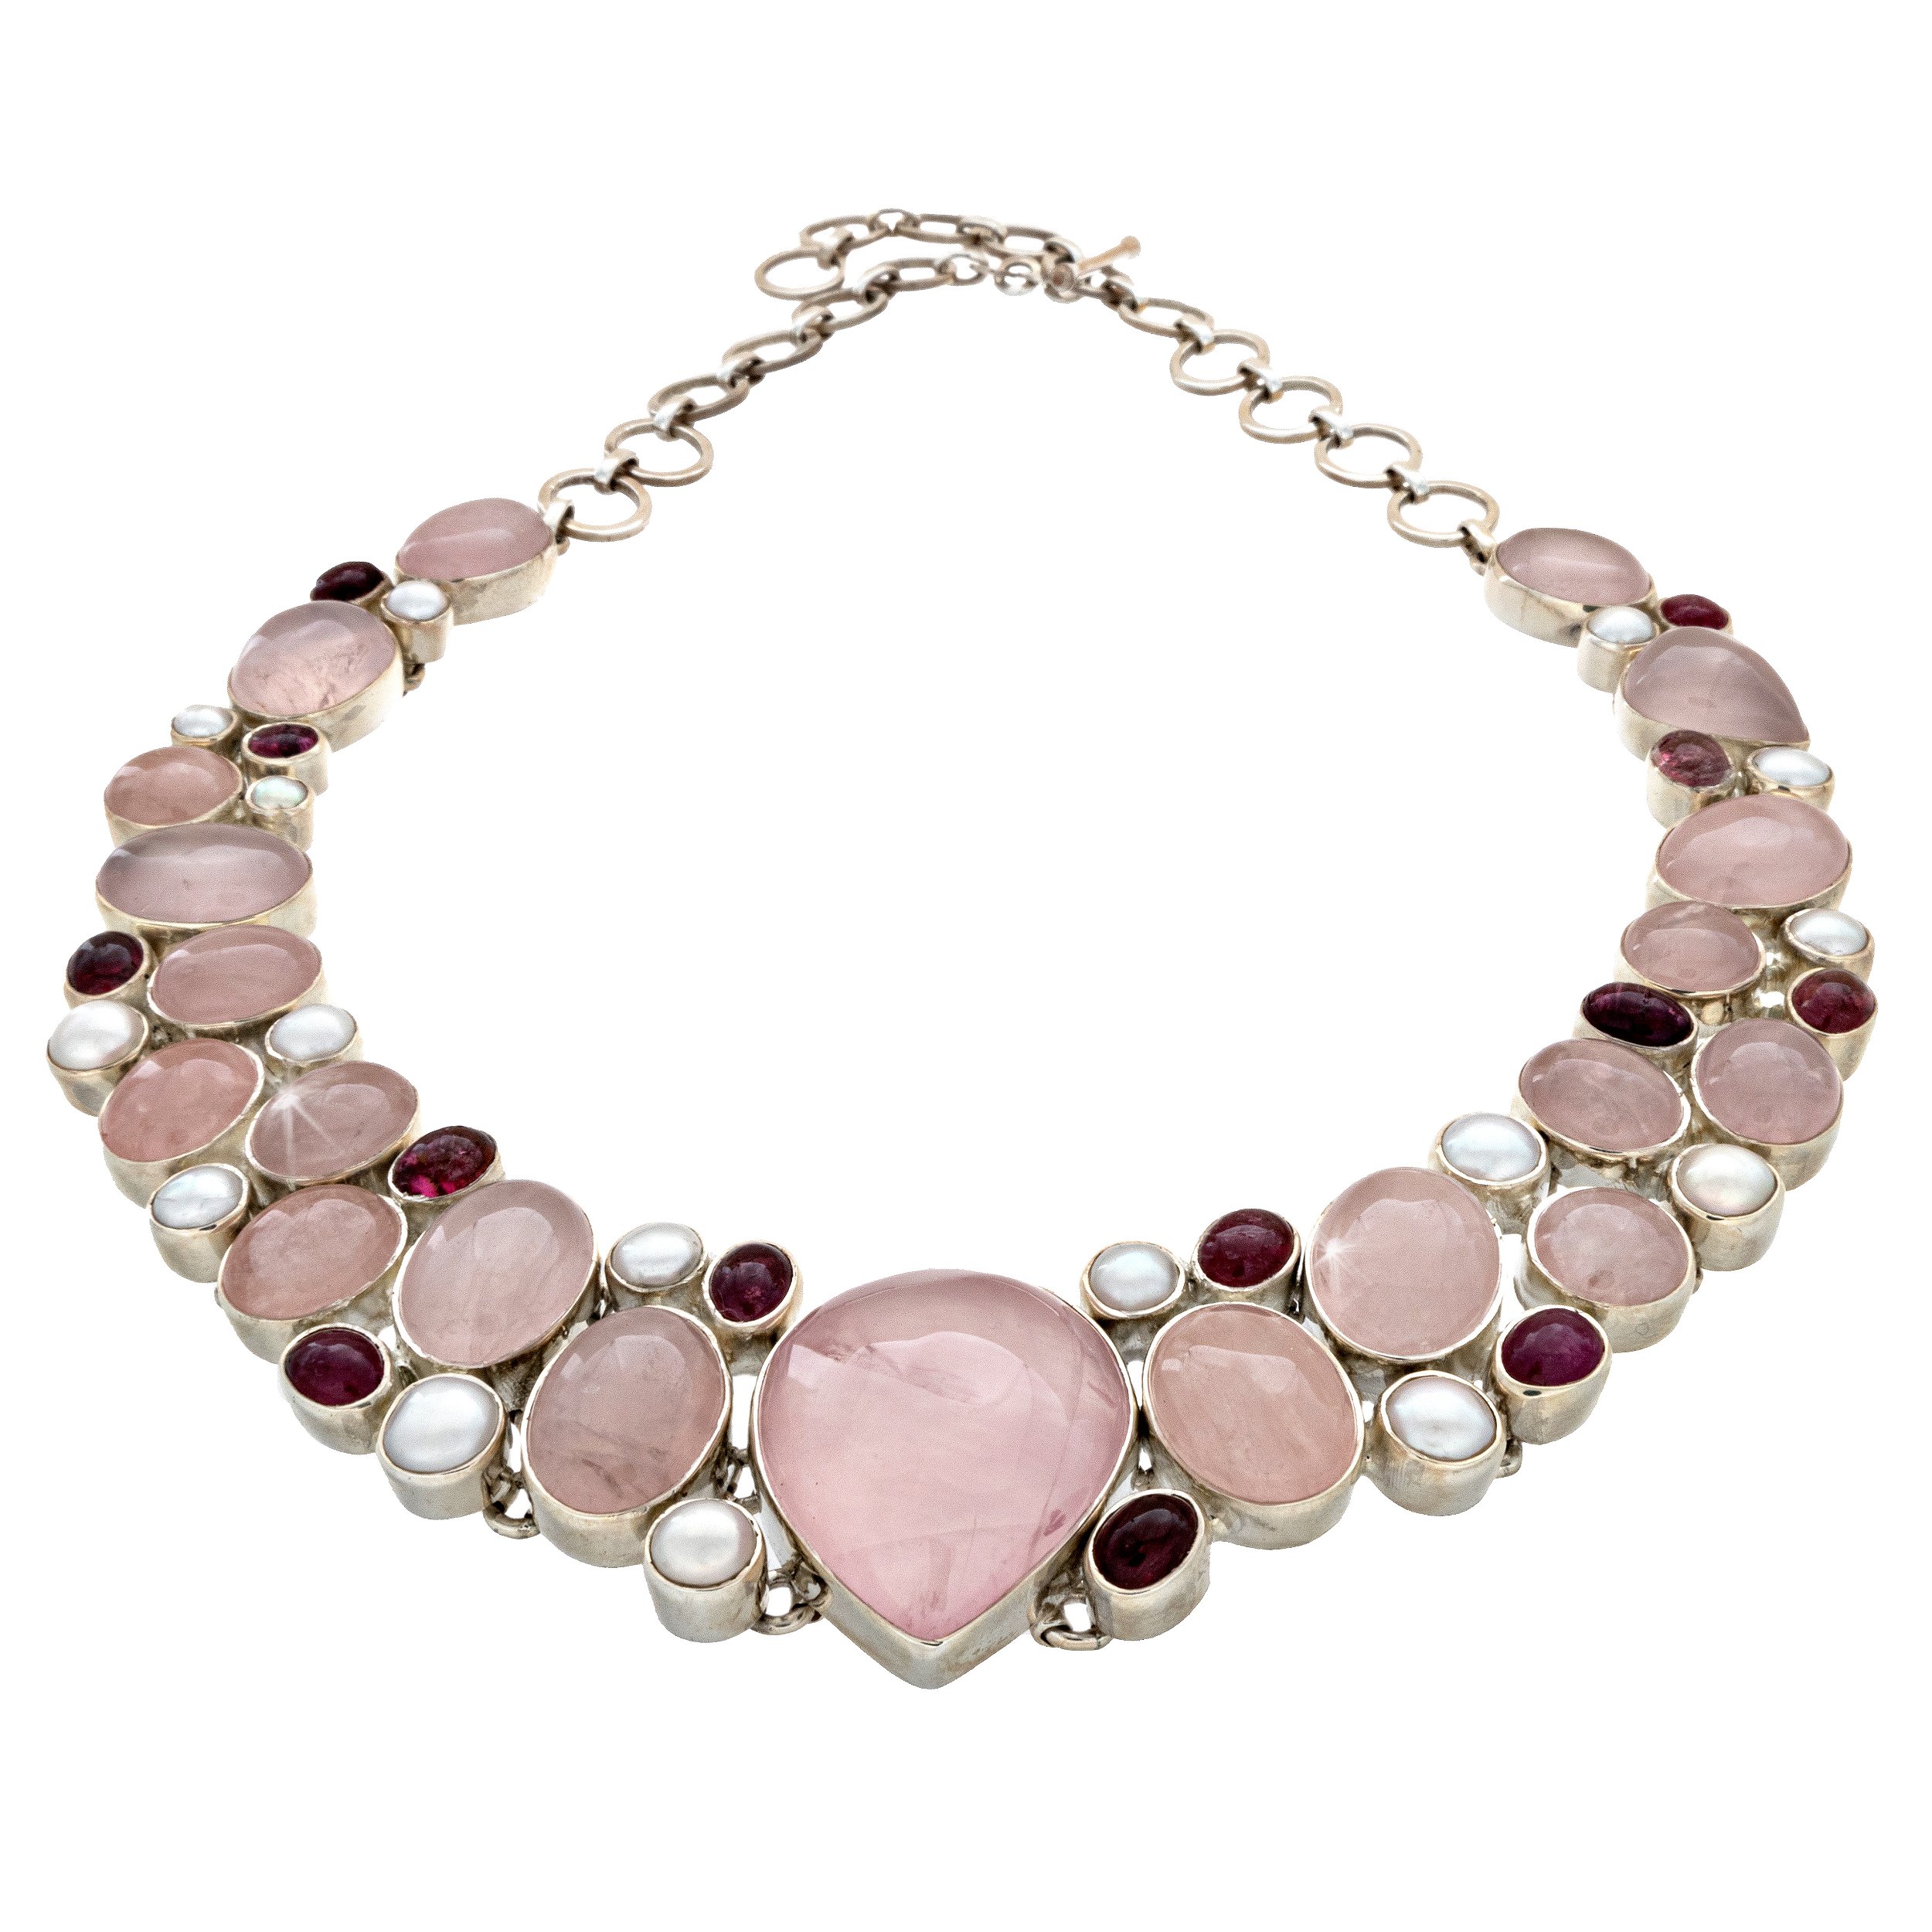 Rose Quartz Collar Necklace - Pear Cabochon Centerpiece & Oval Cabochons With Freshwater Pearls & Pink Tourmaline Oval Cabochons Matrix With Silver Bezels - Toggle Clasp